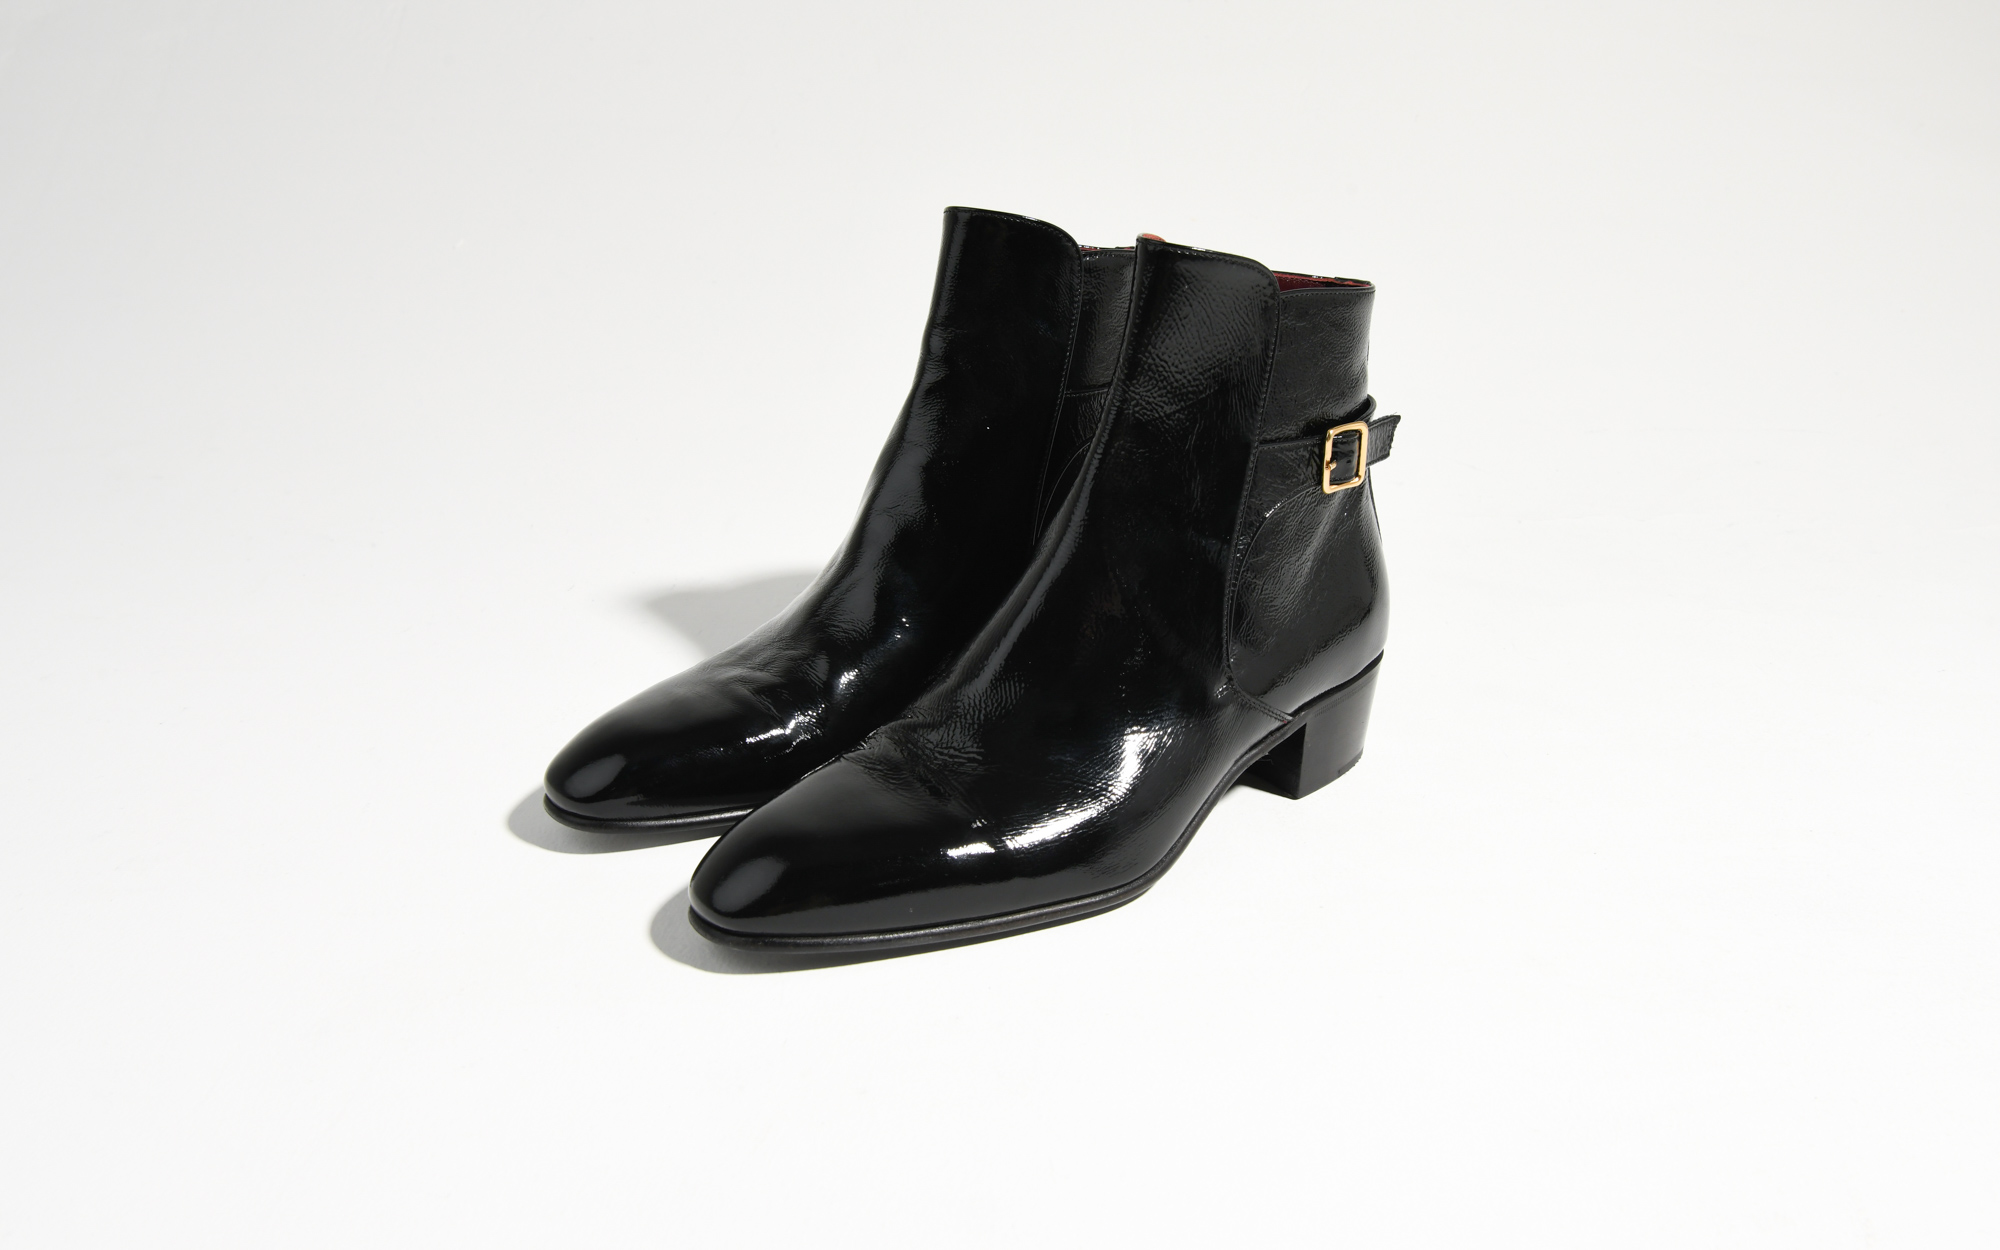 buckled boots in cracked patent leather - black